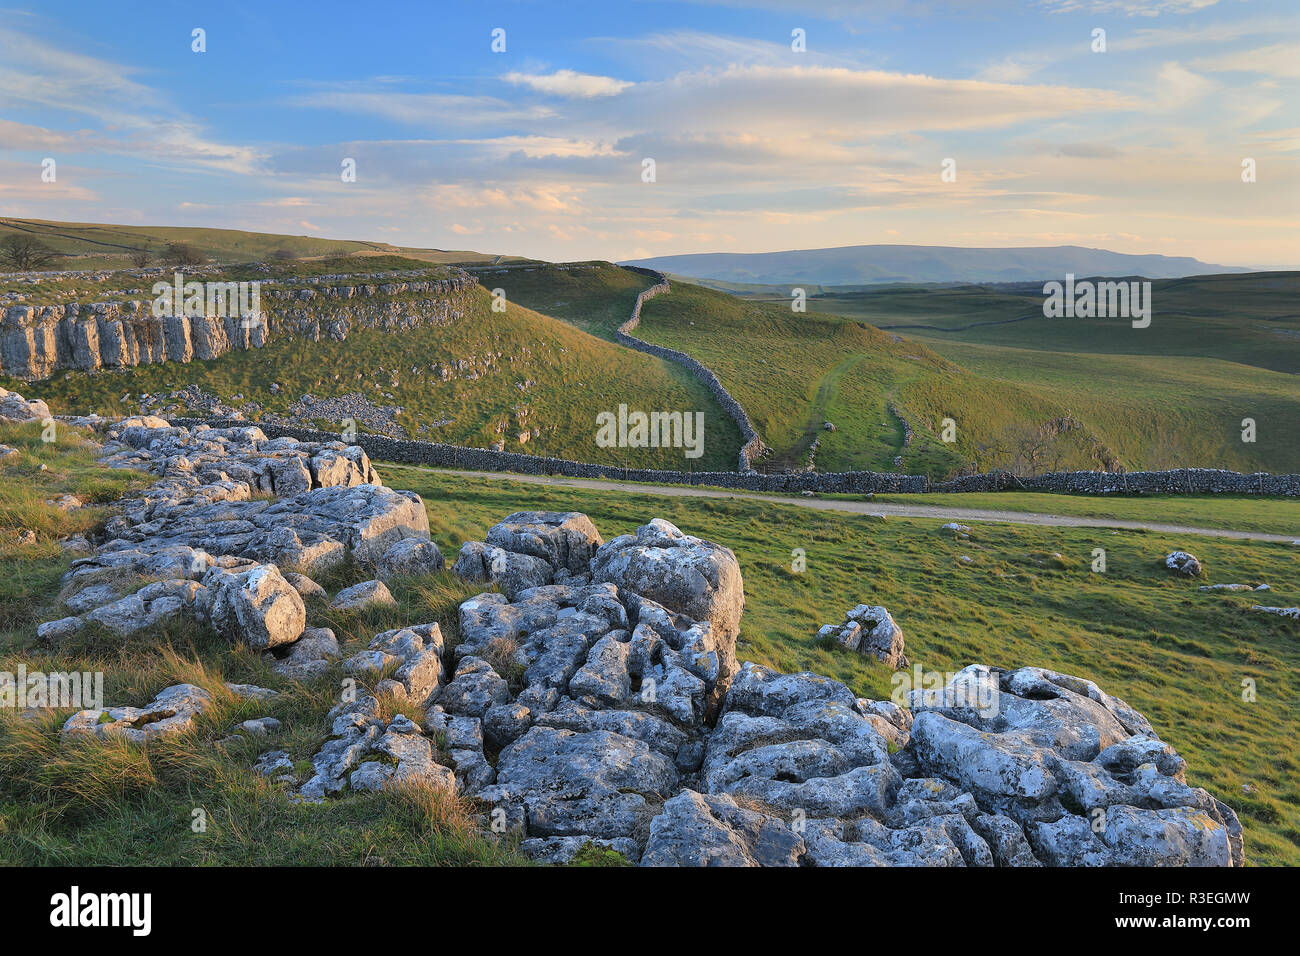 Limestone Pavement near to the village of Conistone in the Yorkshire Dales National Park, North Yorkshire, UK Stock Photo